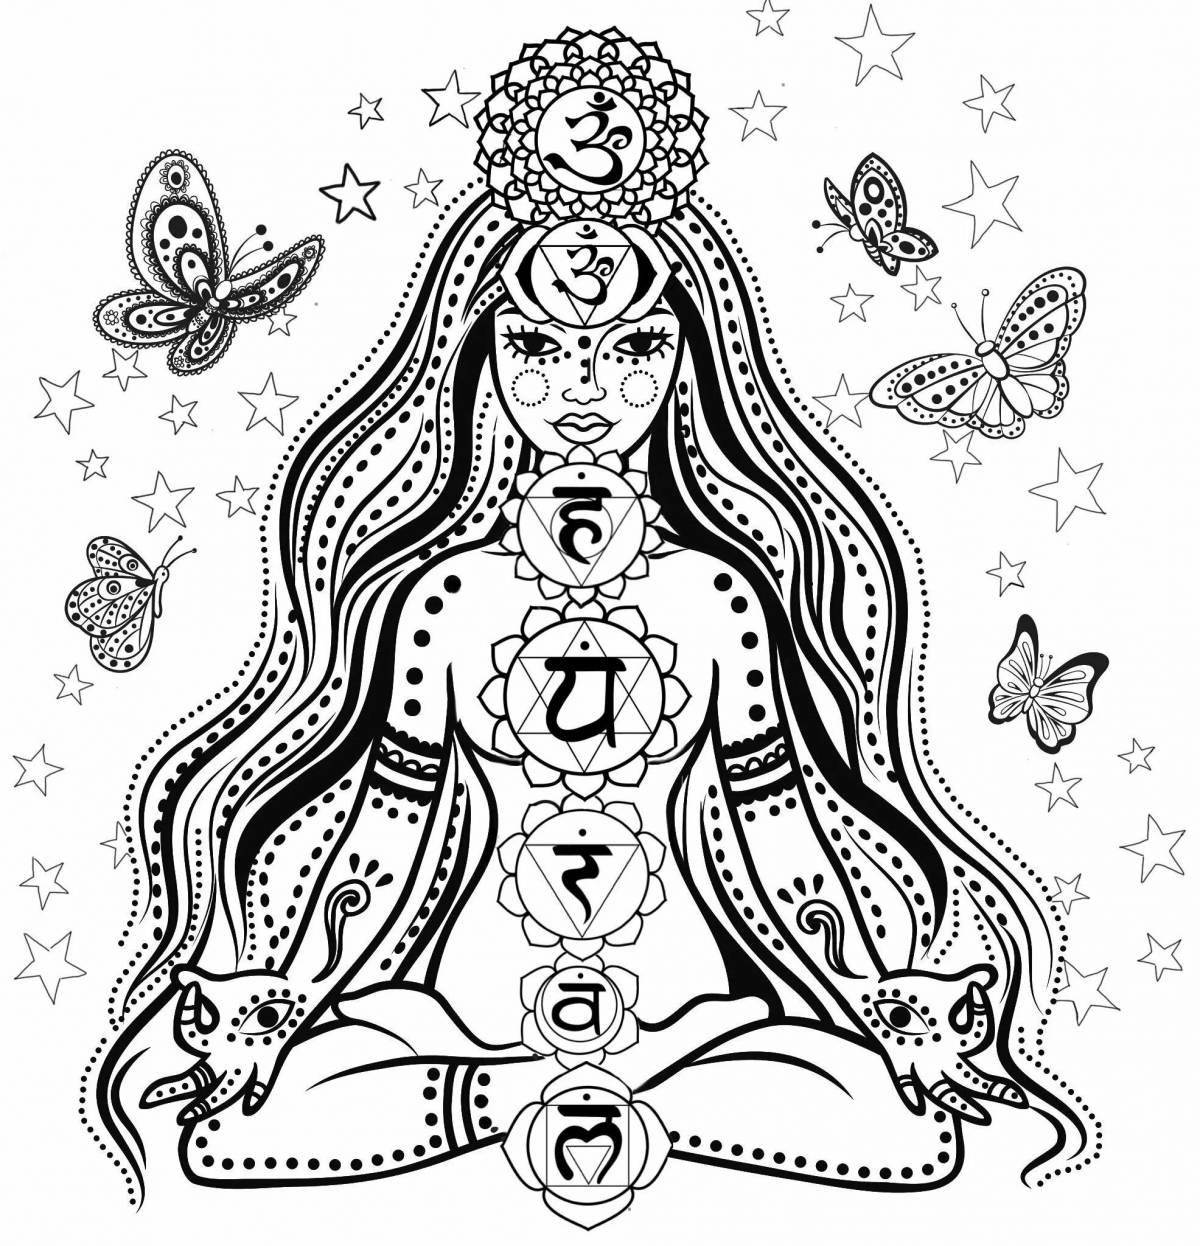 Positive coloring book for meditation and relaxation